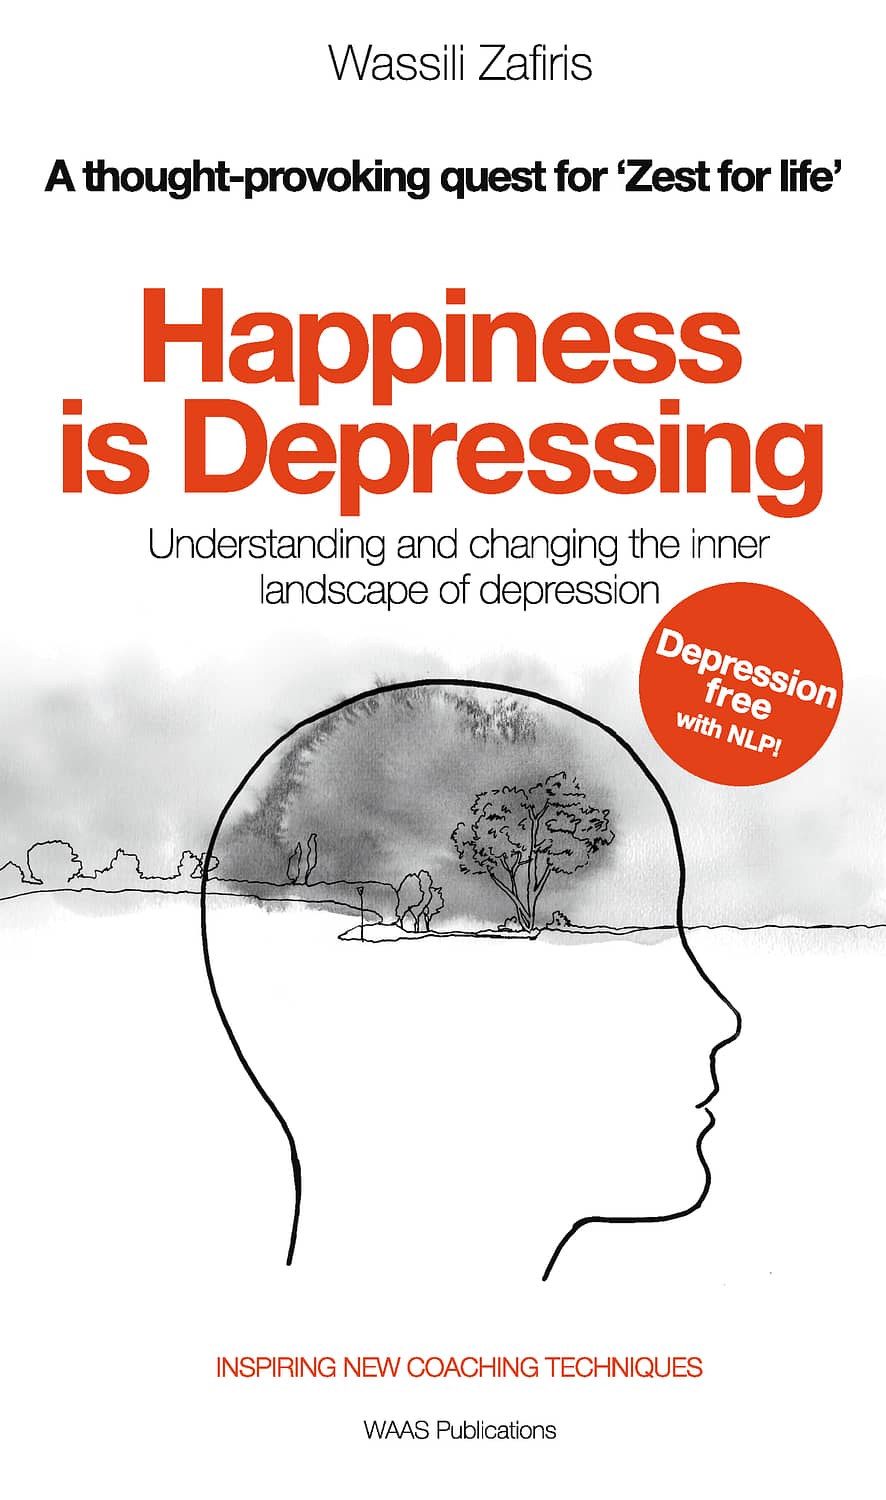 Beyond Depression. The Zest for Life podcast. Happiness is depressing. Wassili Zafiris. NLP.